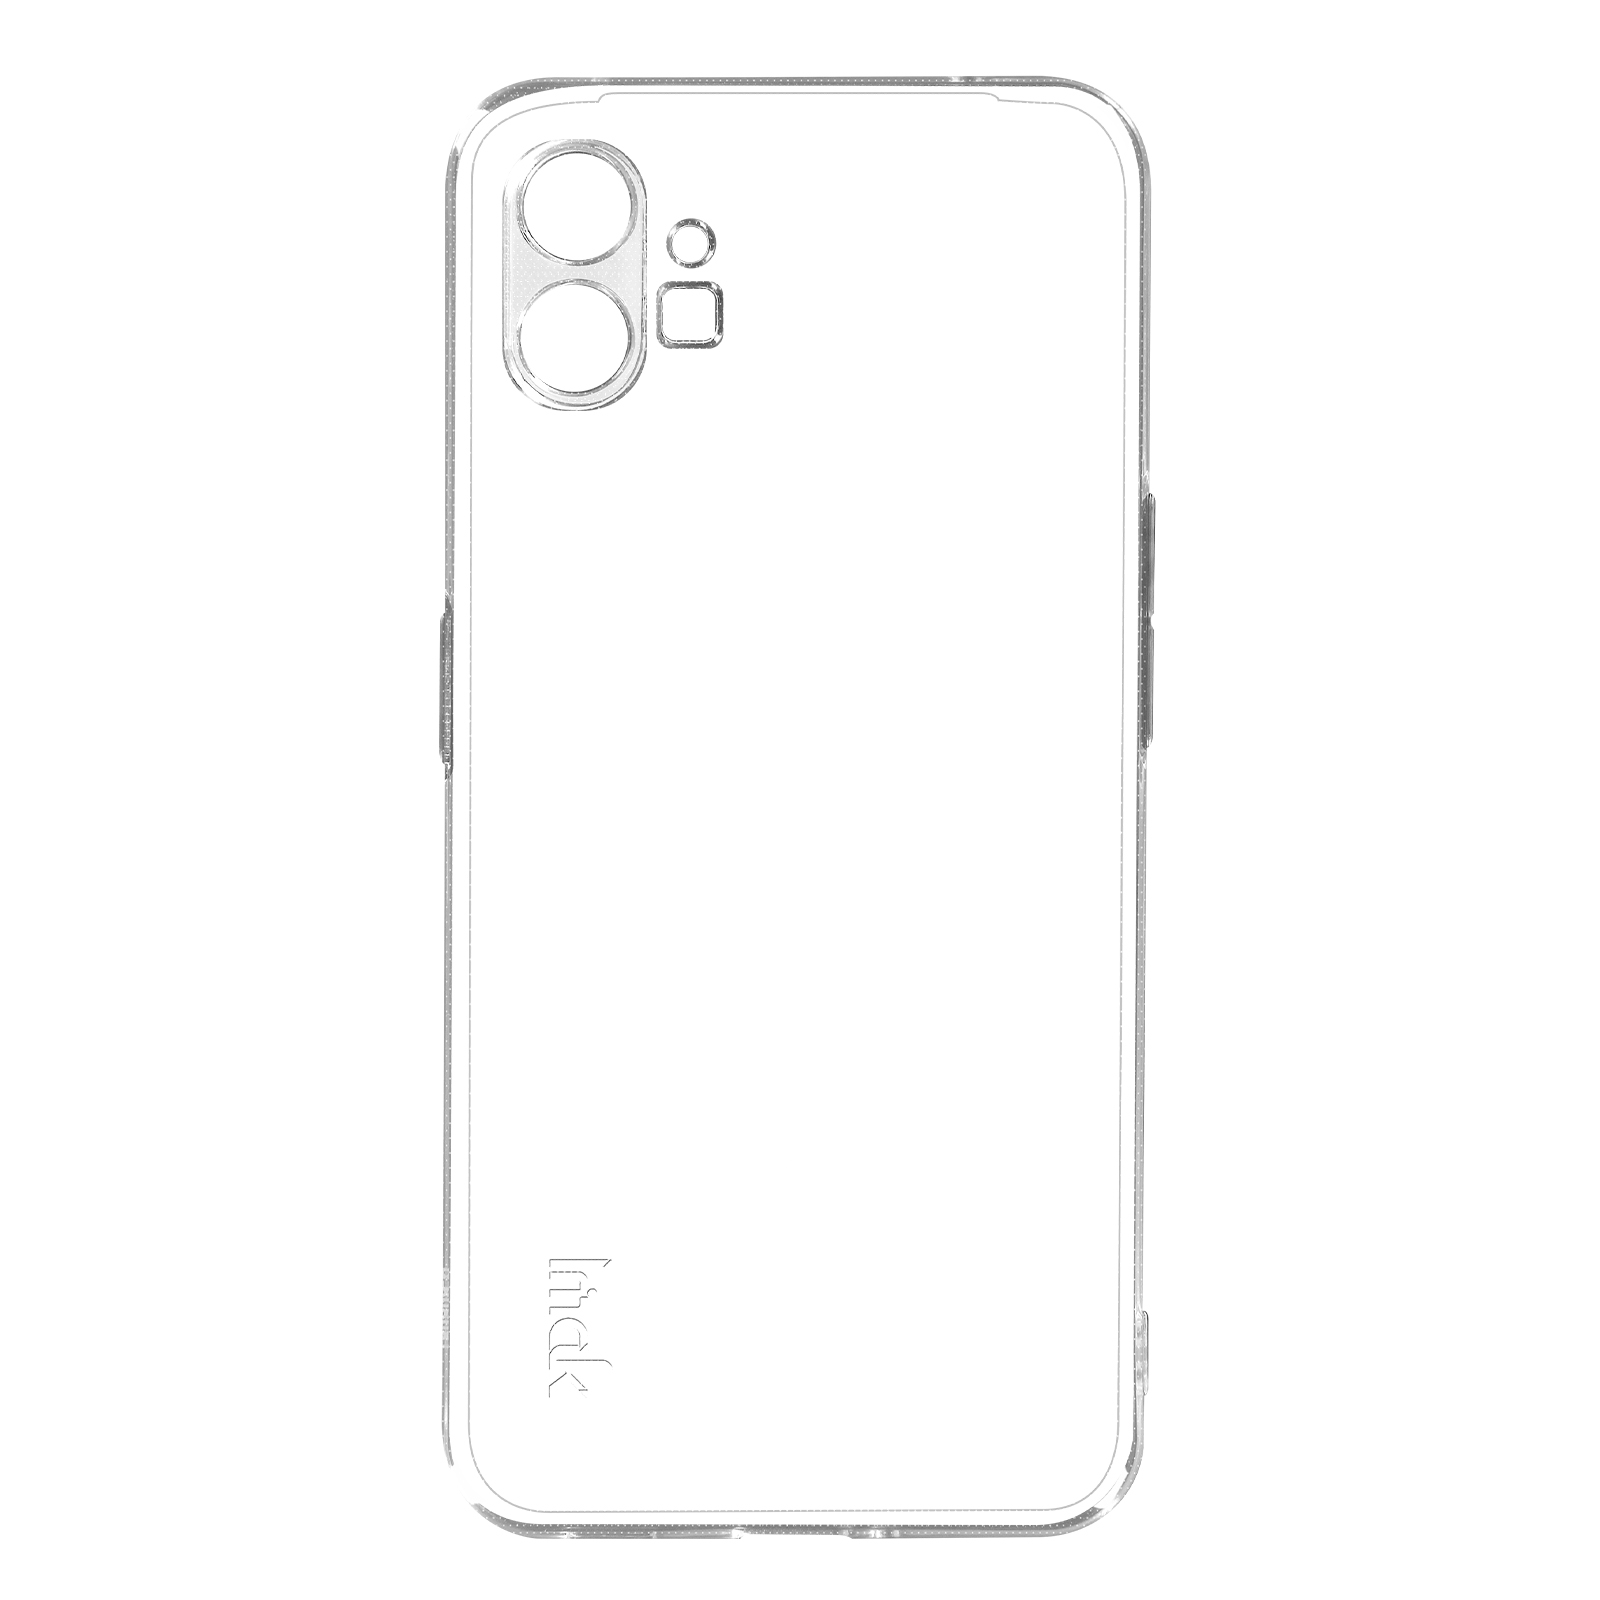 IMAK Soft Nothing, Touch Series, 1, Transparent Phone Backcover